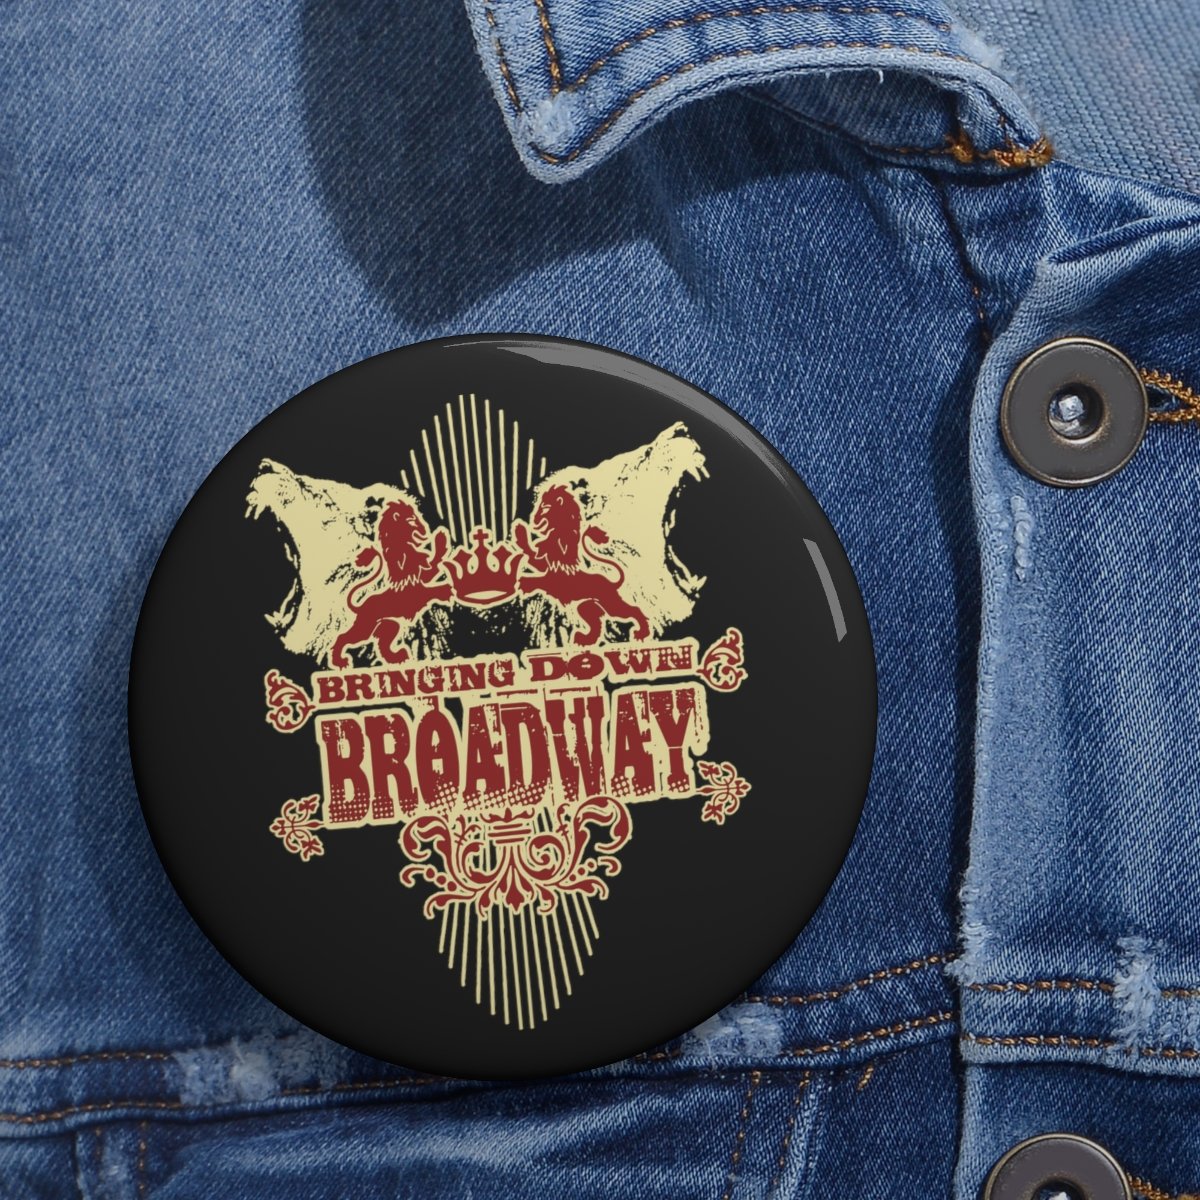 Bringing Down Broadway – Lion Crest Pin Buttons